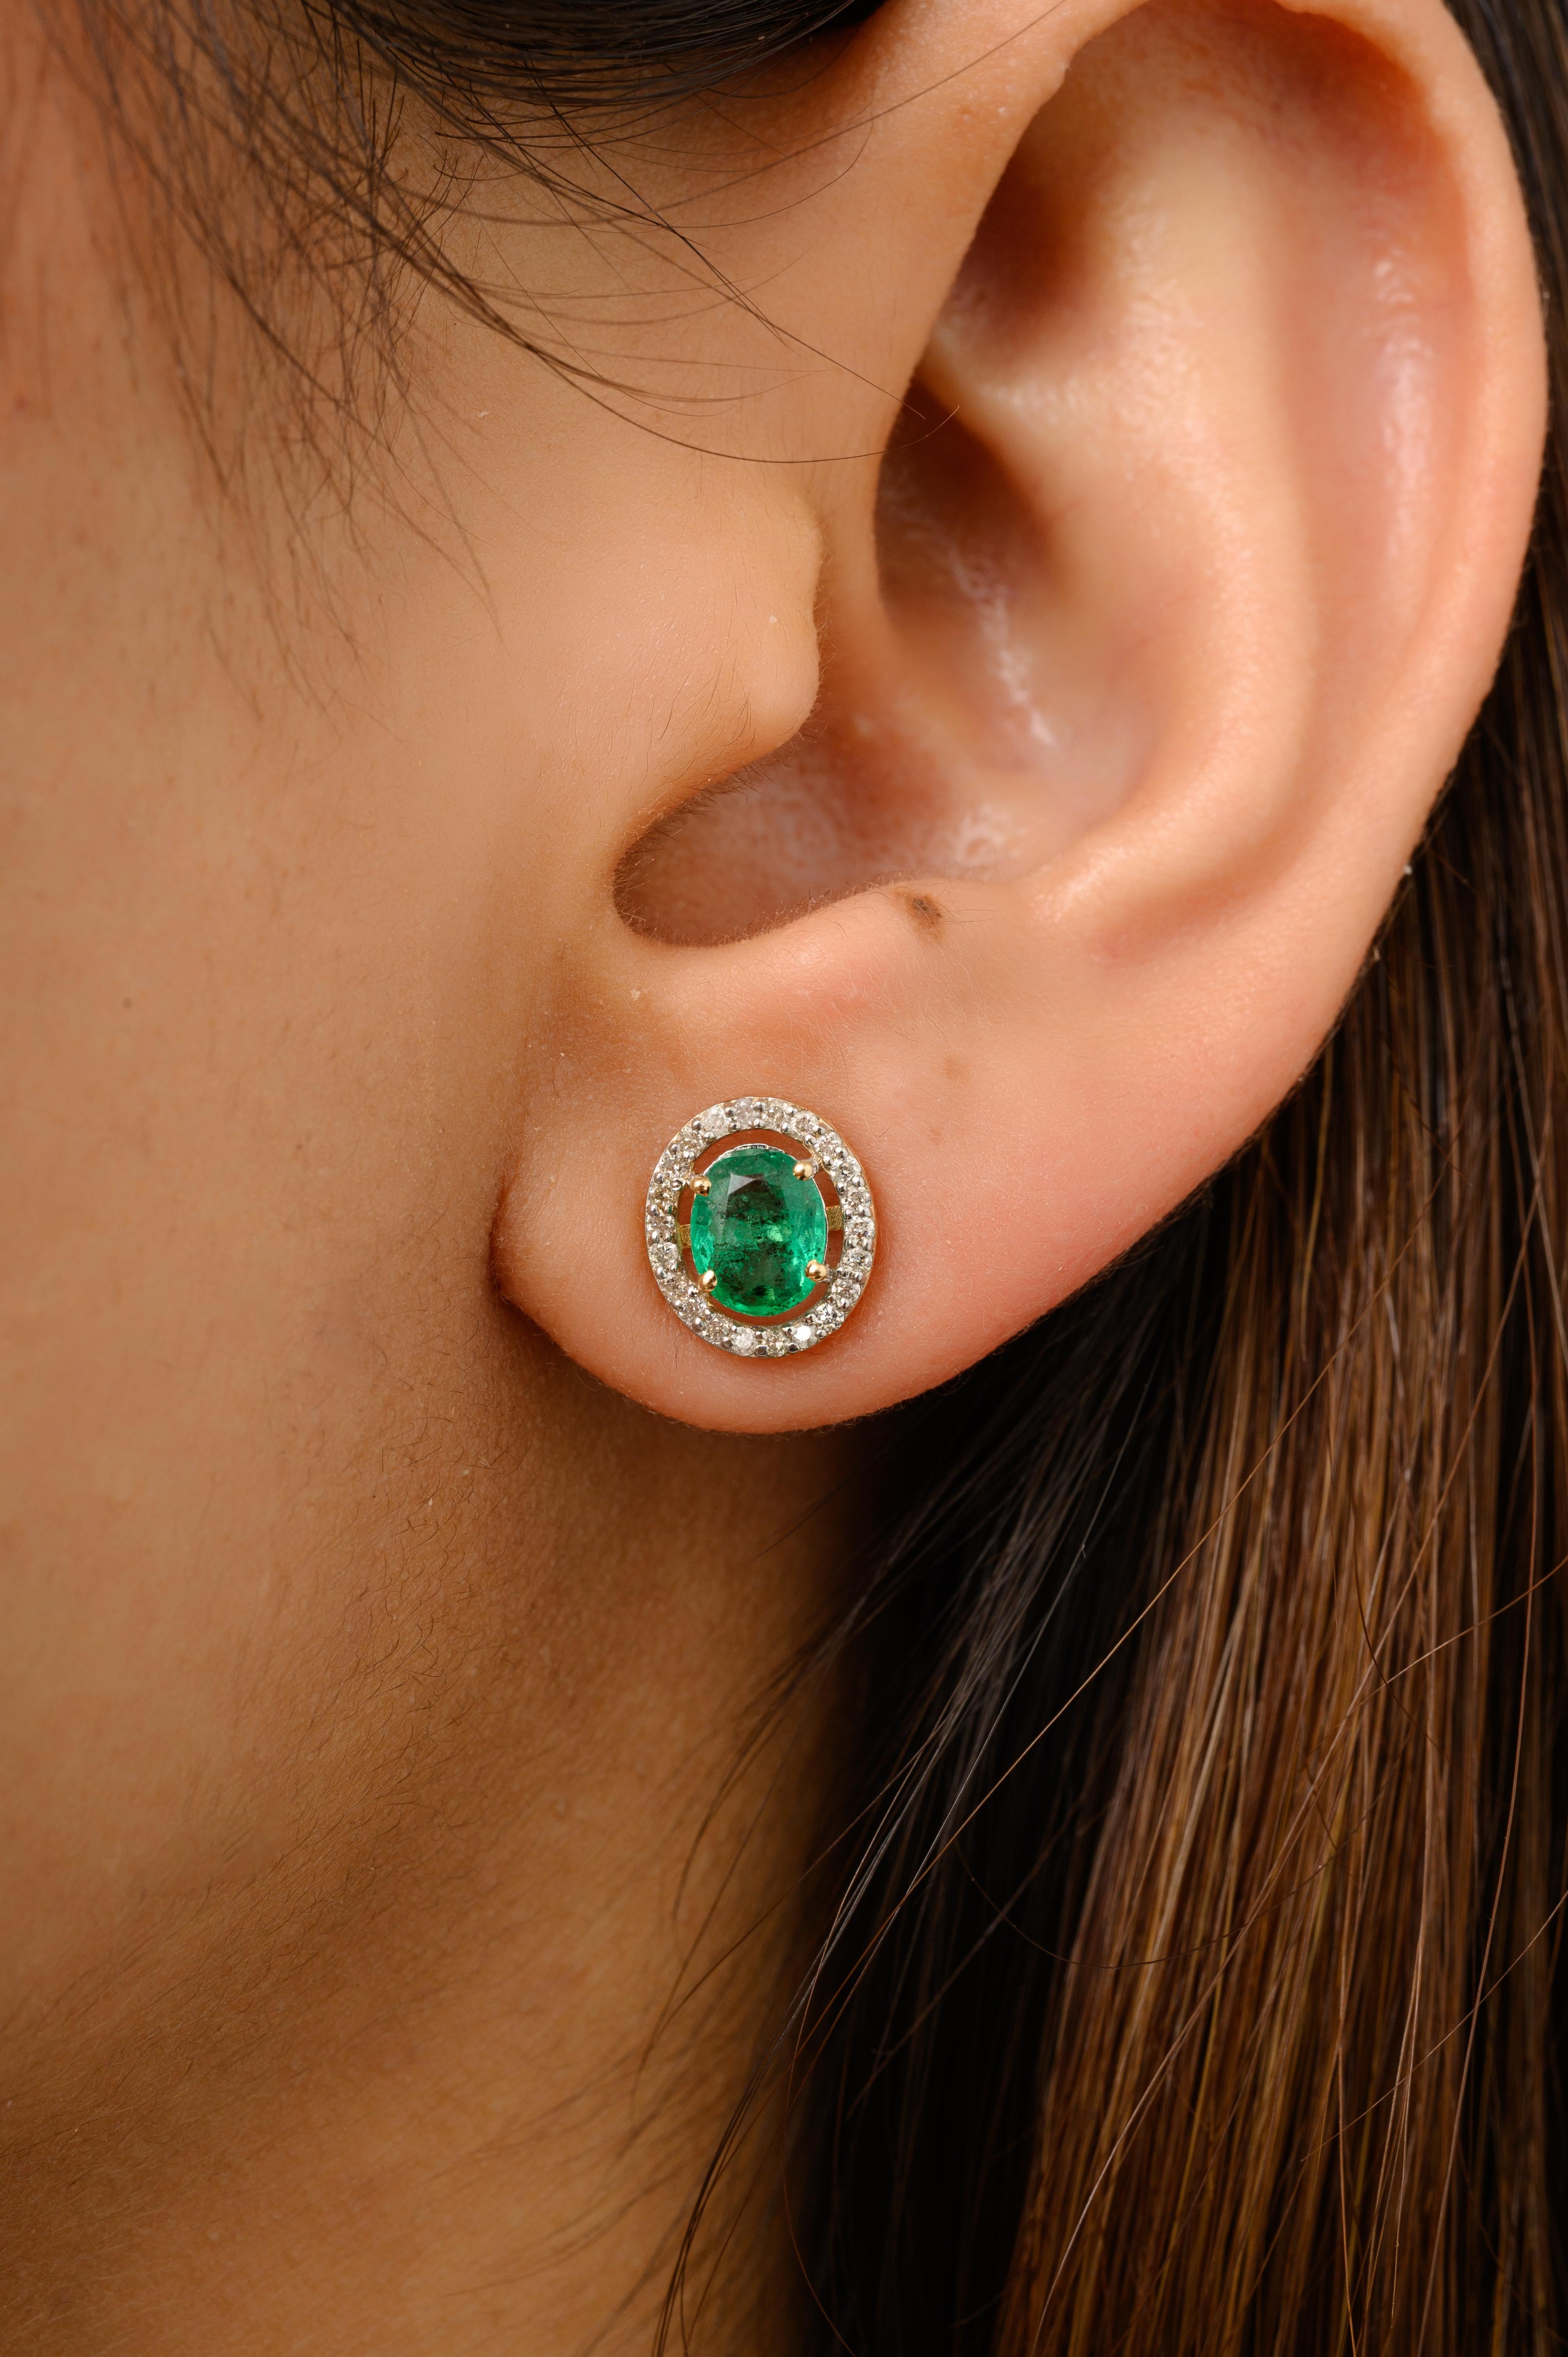 Genuine Emerald Diamond Halo Stud Earrings in 14K Gold to make a statement with your look. You shall need stud earrings to make a statement with your look. These earrings create a sparkling, luxurious look featuring oval cut emerald and round cut